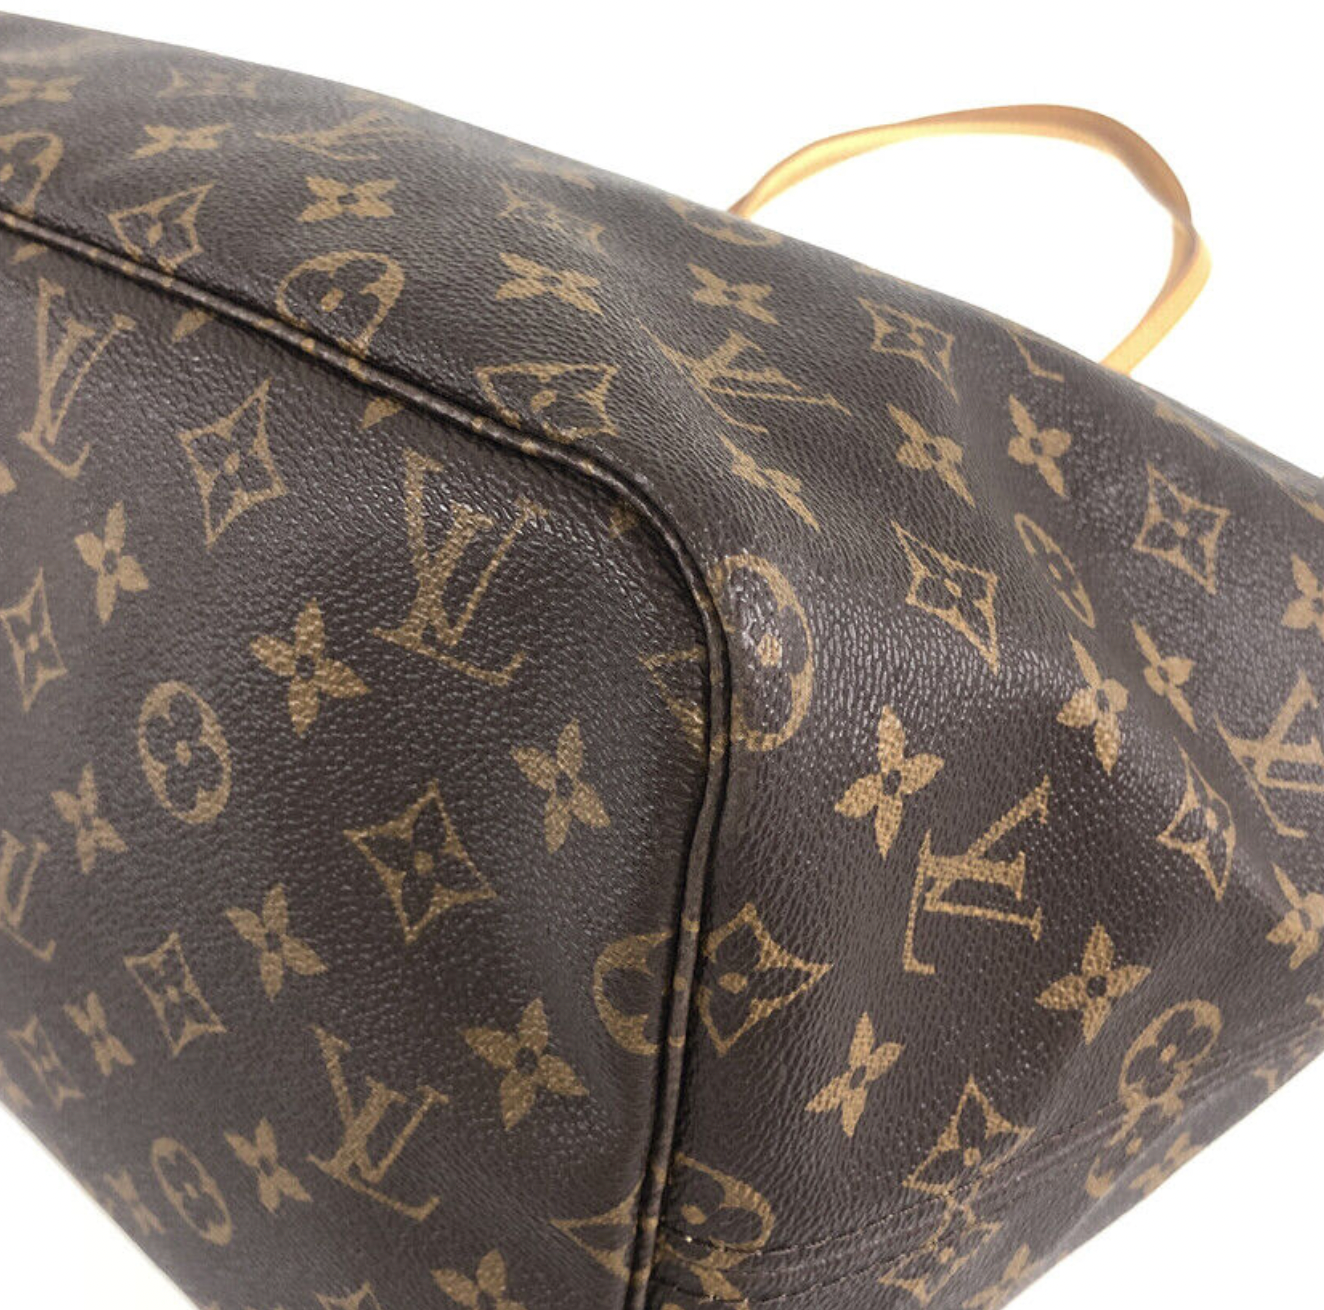 Louis Vuitton 2010 pre-owned Neverfull GM tote bag - ShopStyle